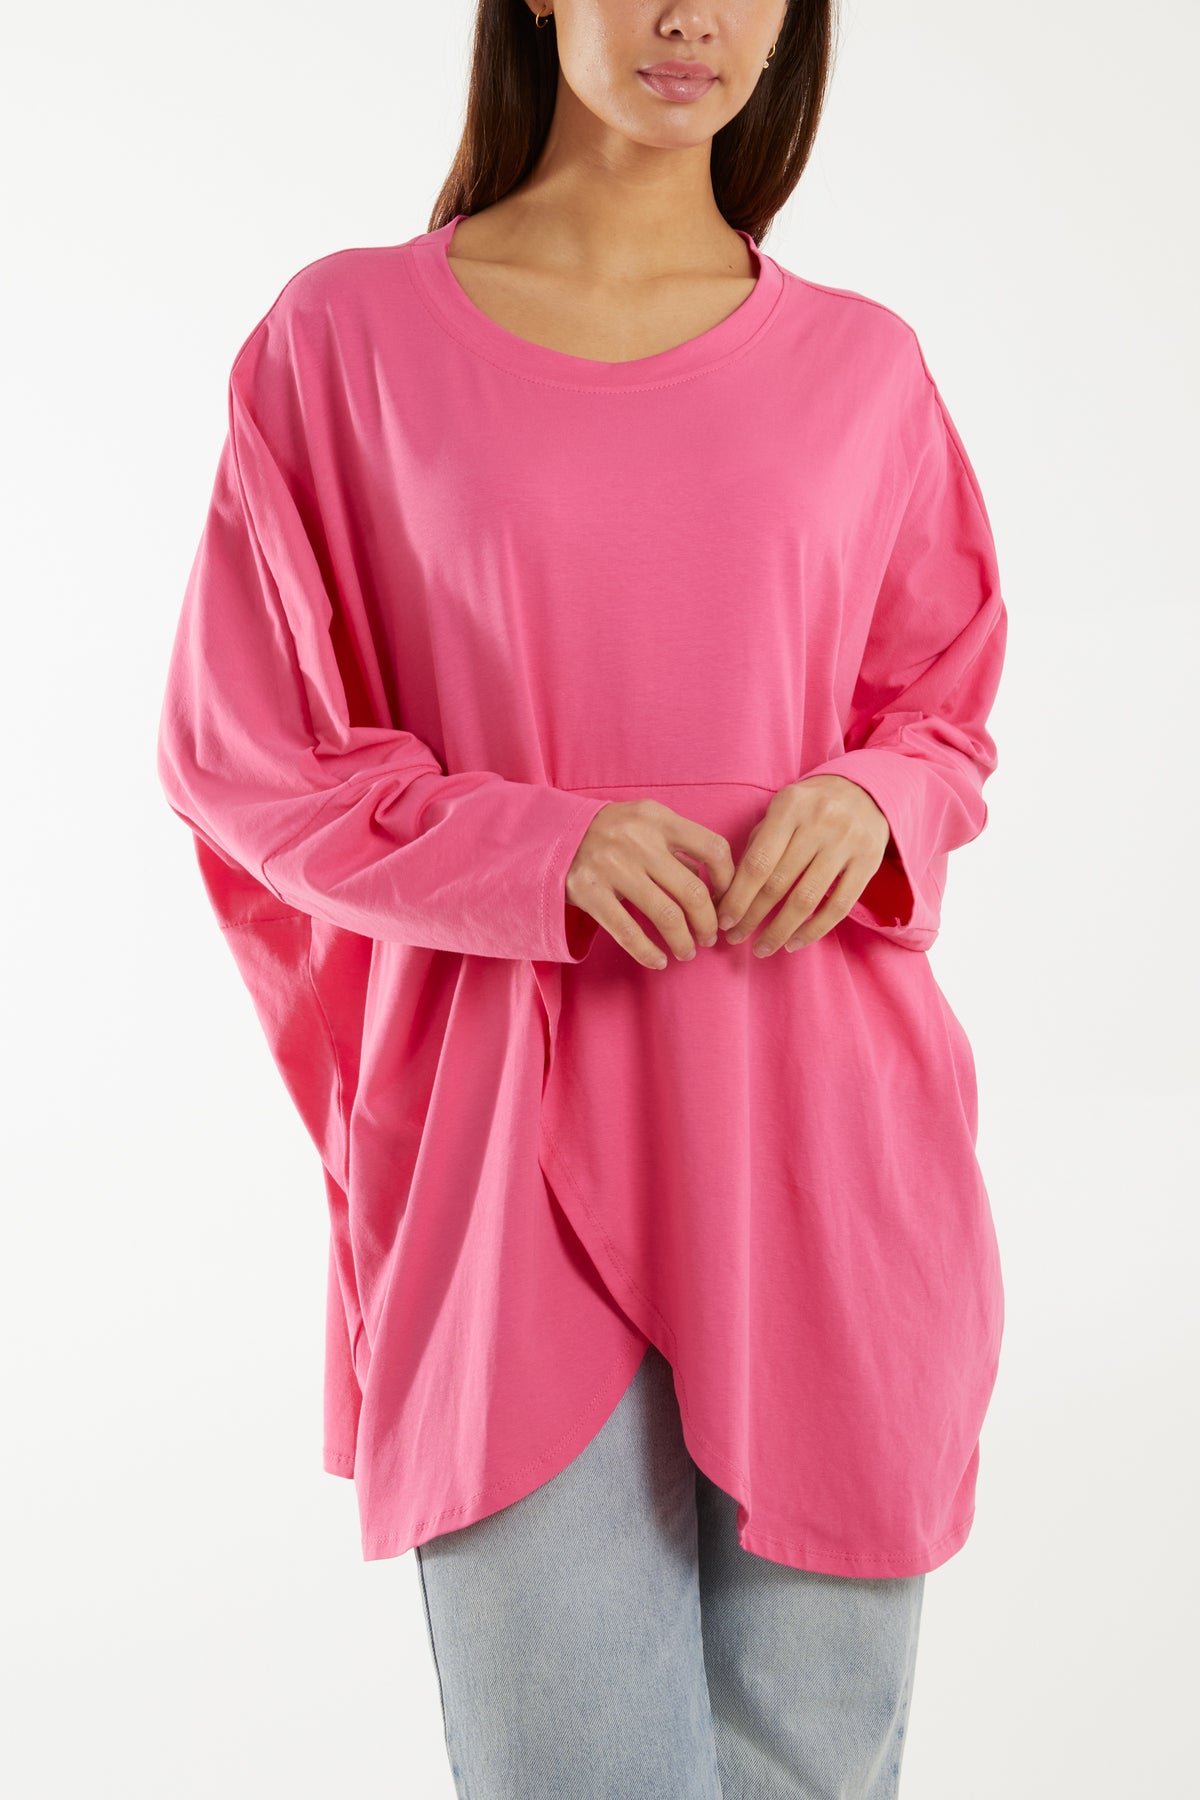 Wrap Front Pockets Long Sleeve Top